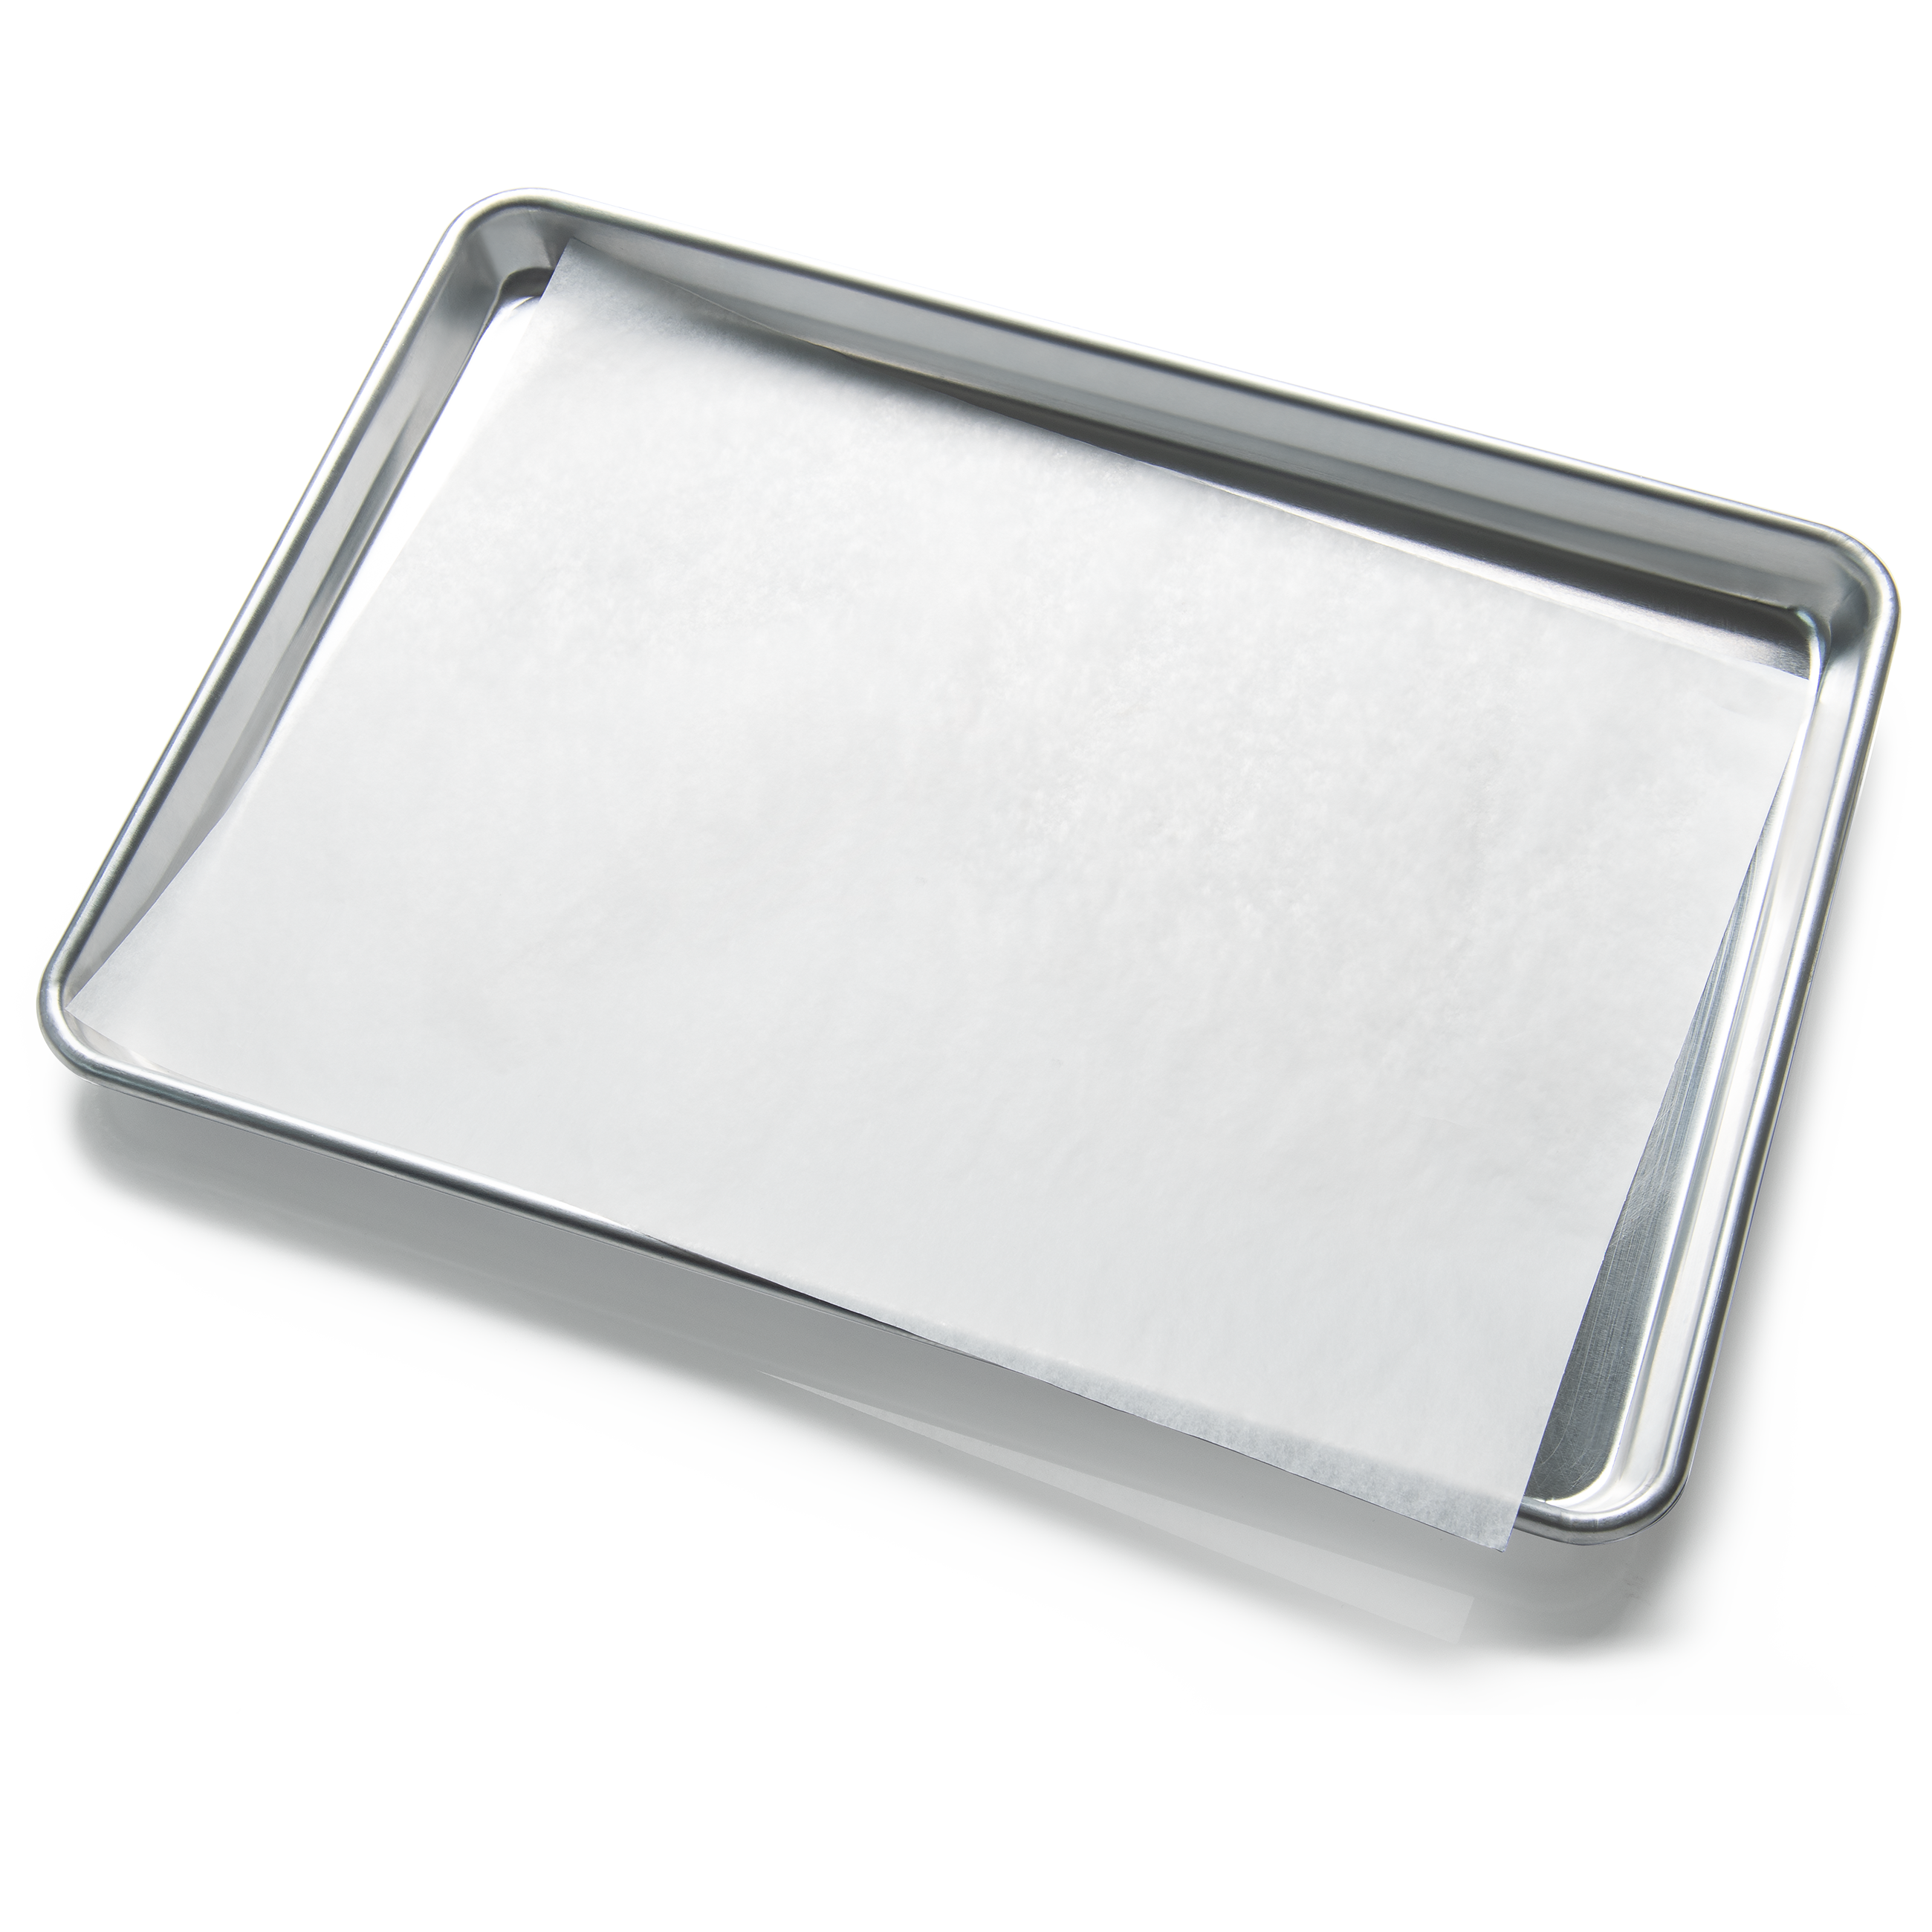 The Sheet Pan Bundle by Kana  As recommended by Cloudy Kitchen